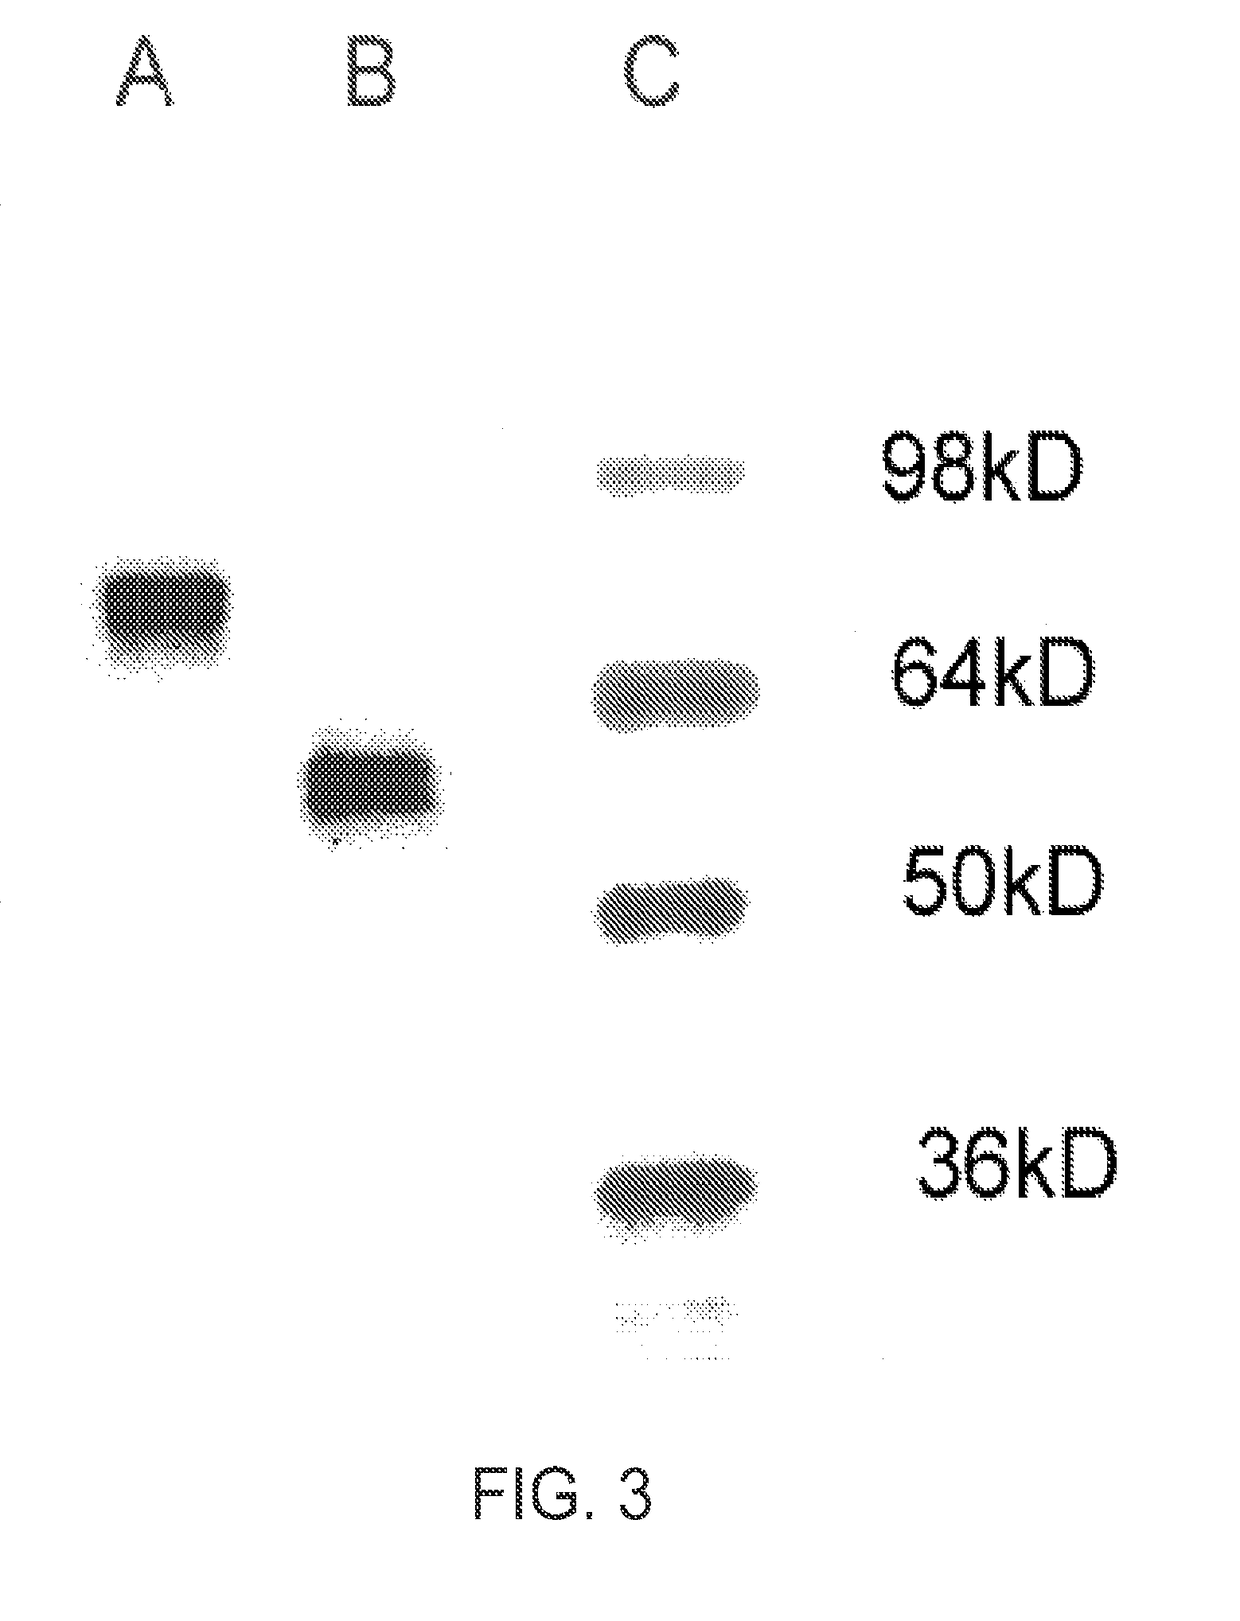 CR-2 binding peptide P28 as molecular adjuvant for DNA vaccines